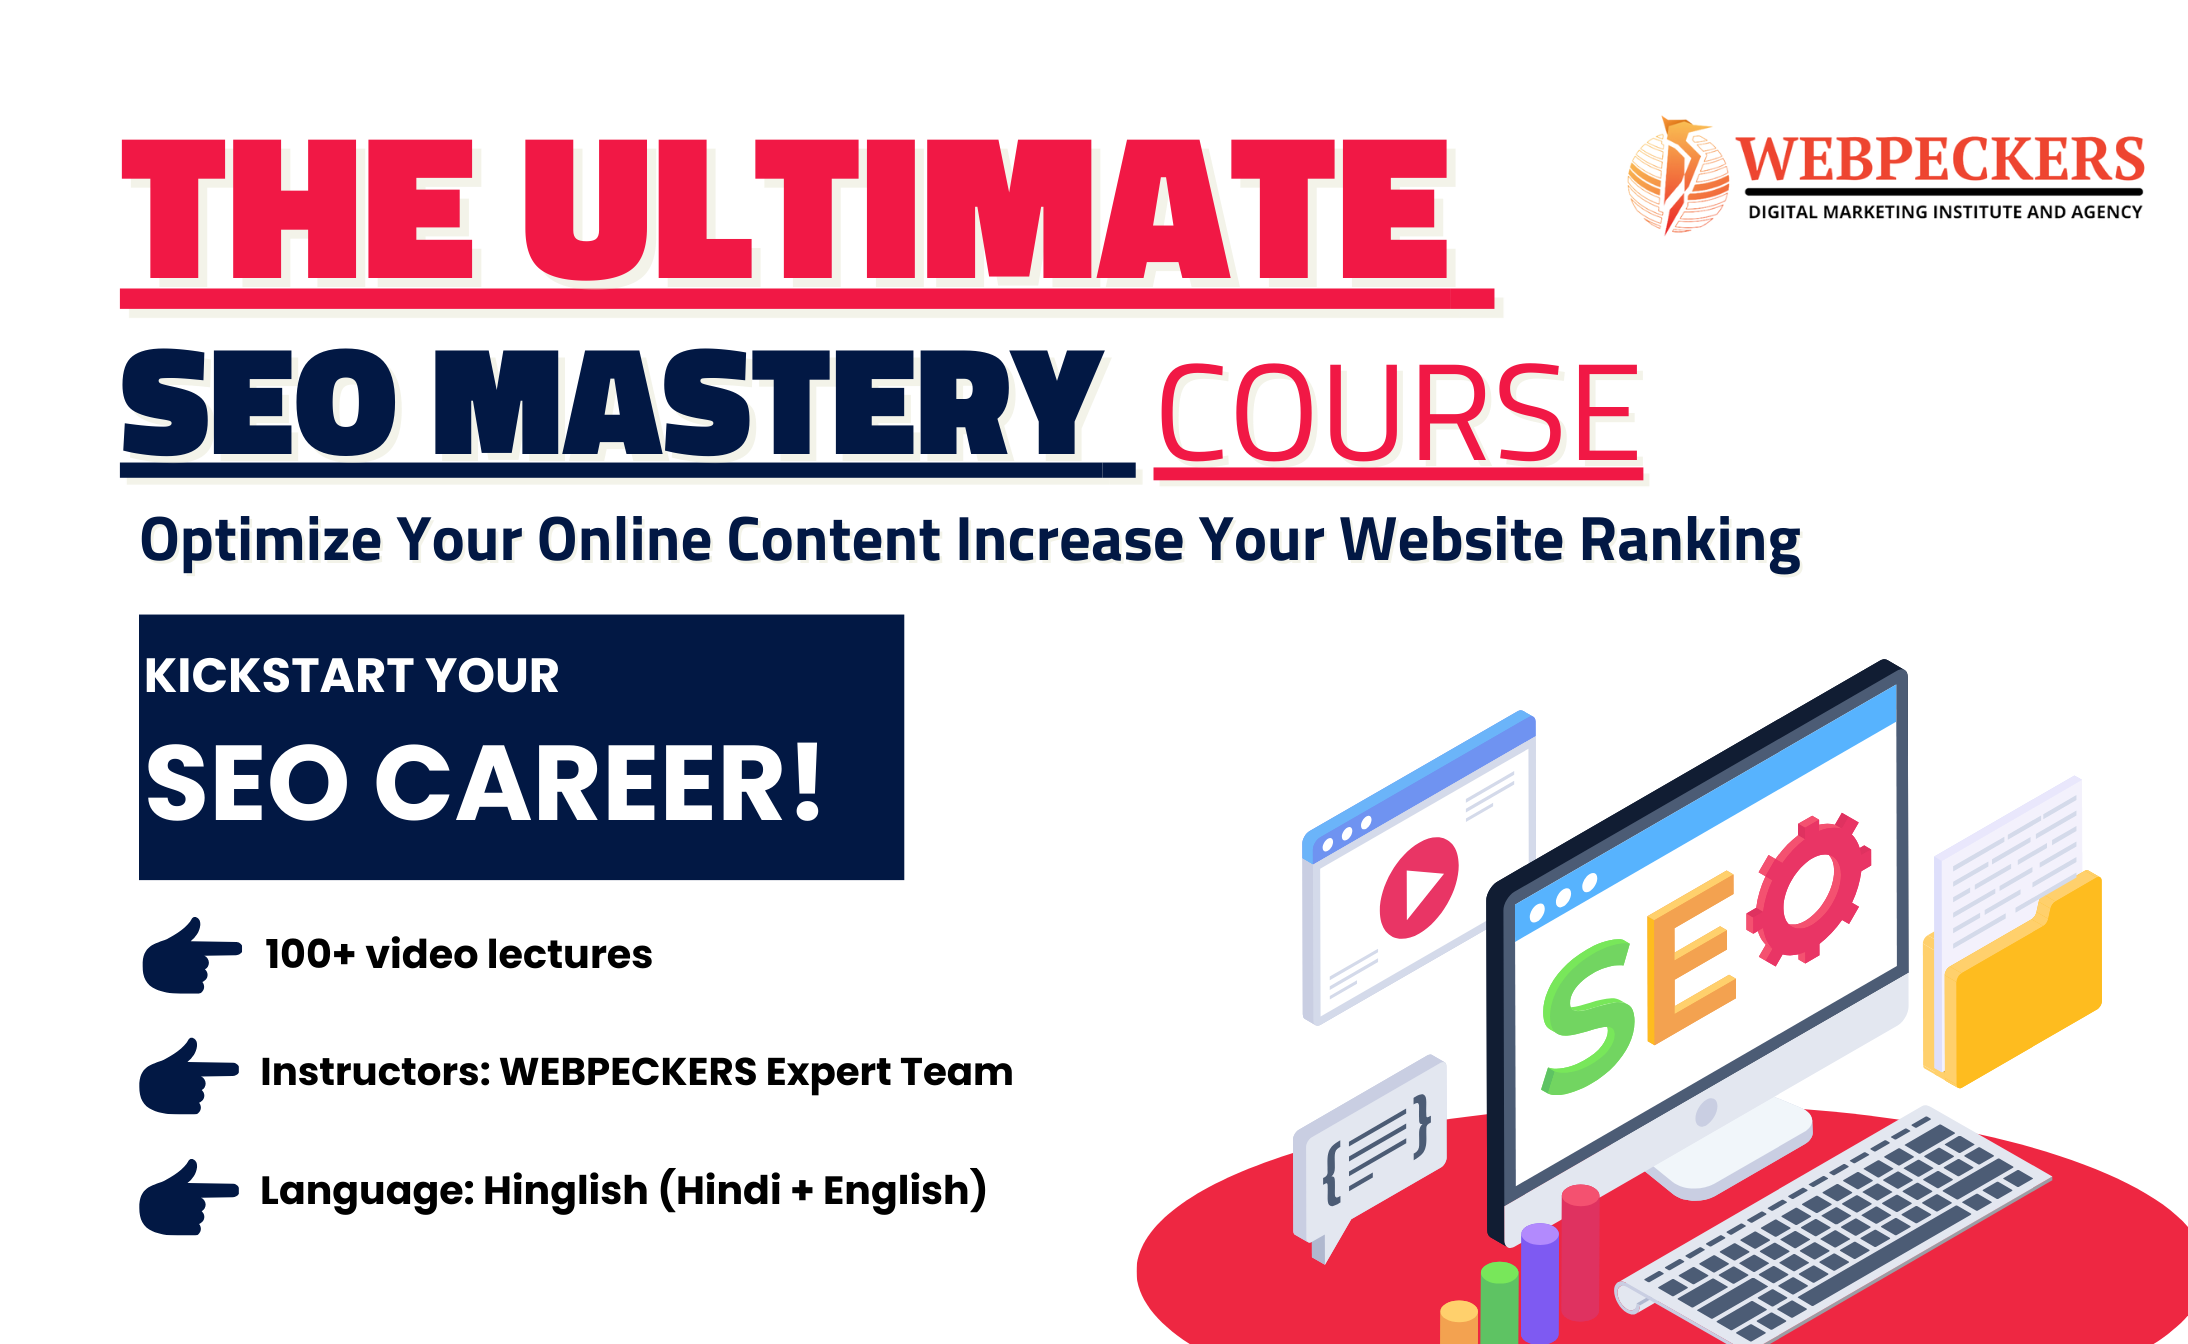 The Ultimate SEO Mastery Course